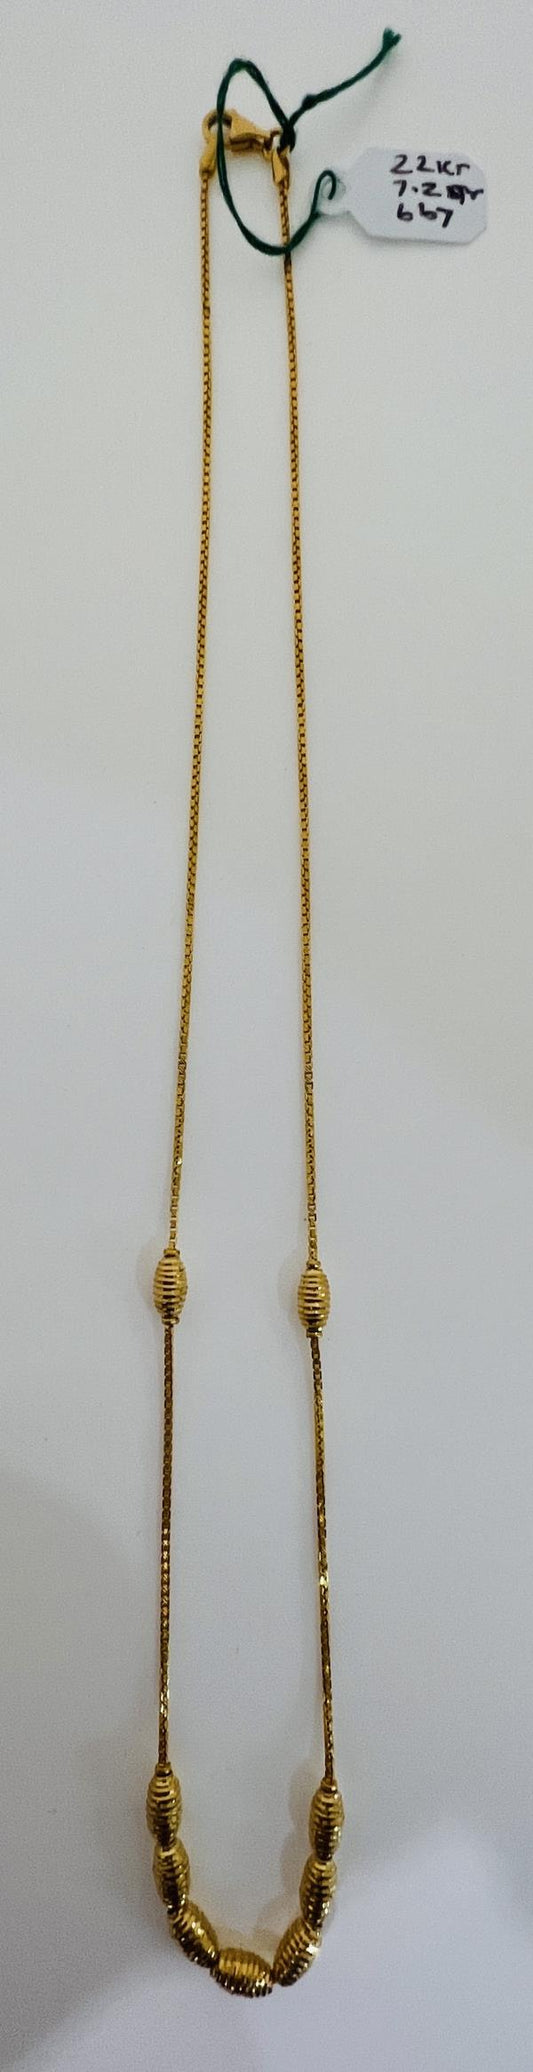 22KT GOLD CHAIN 18" 7.2GM